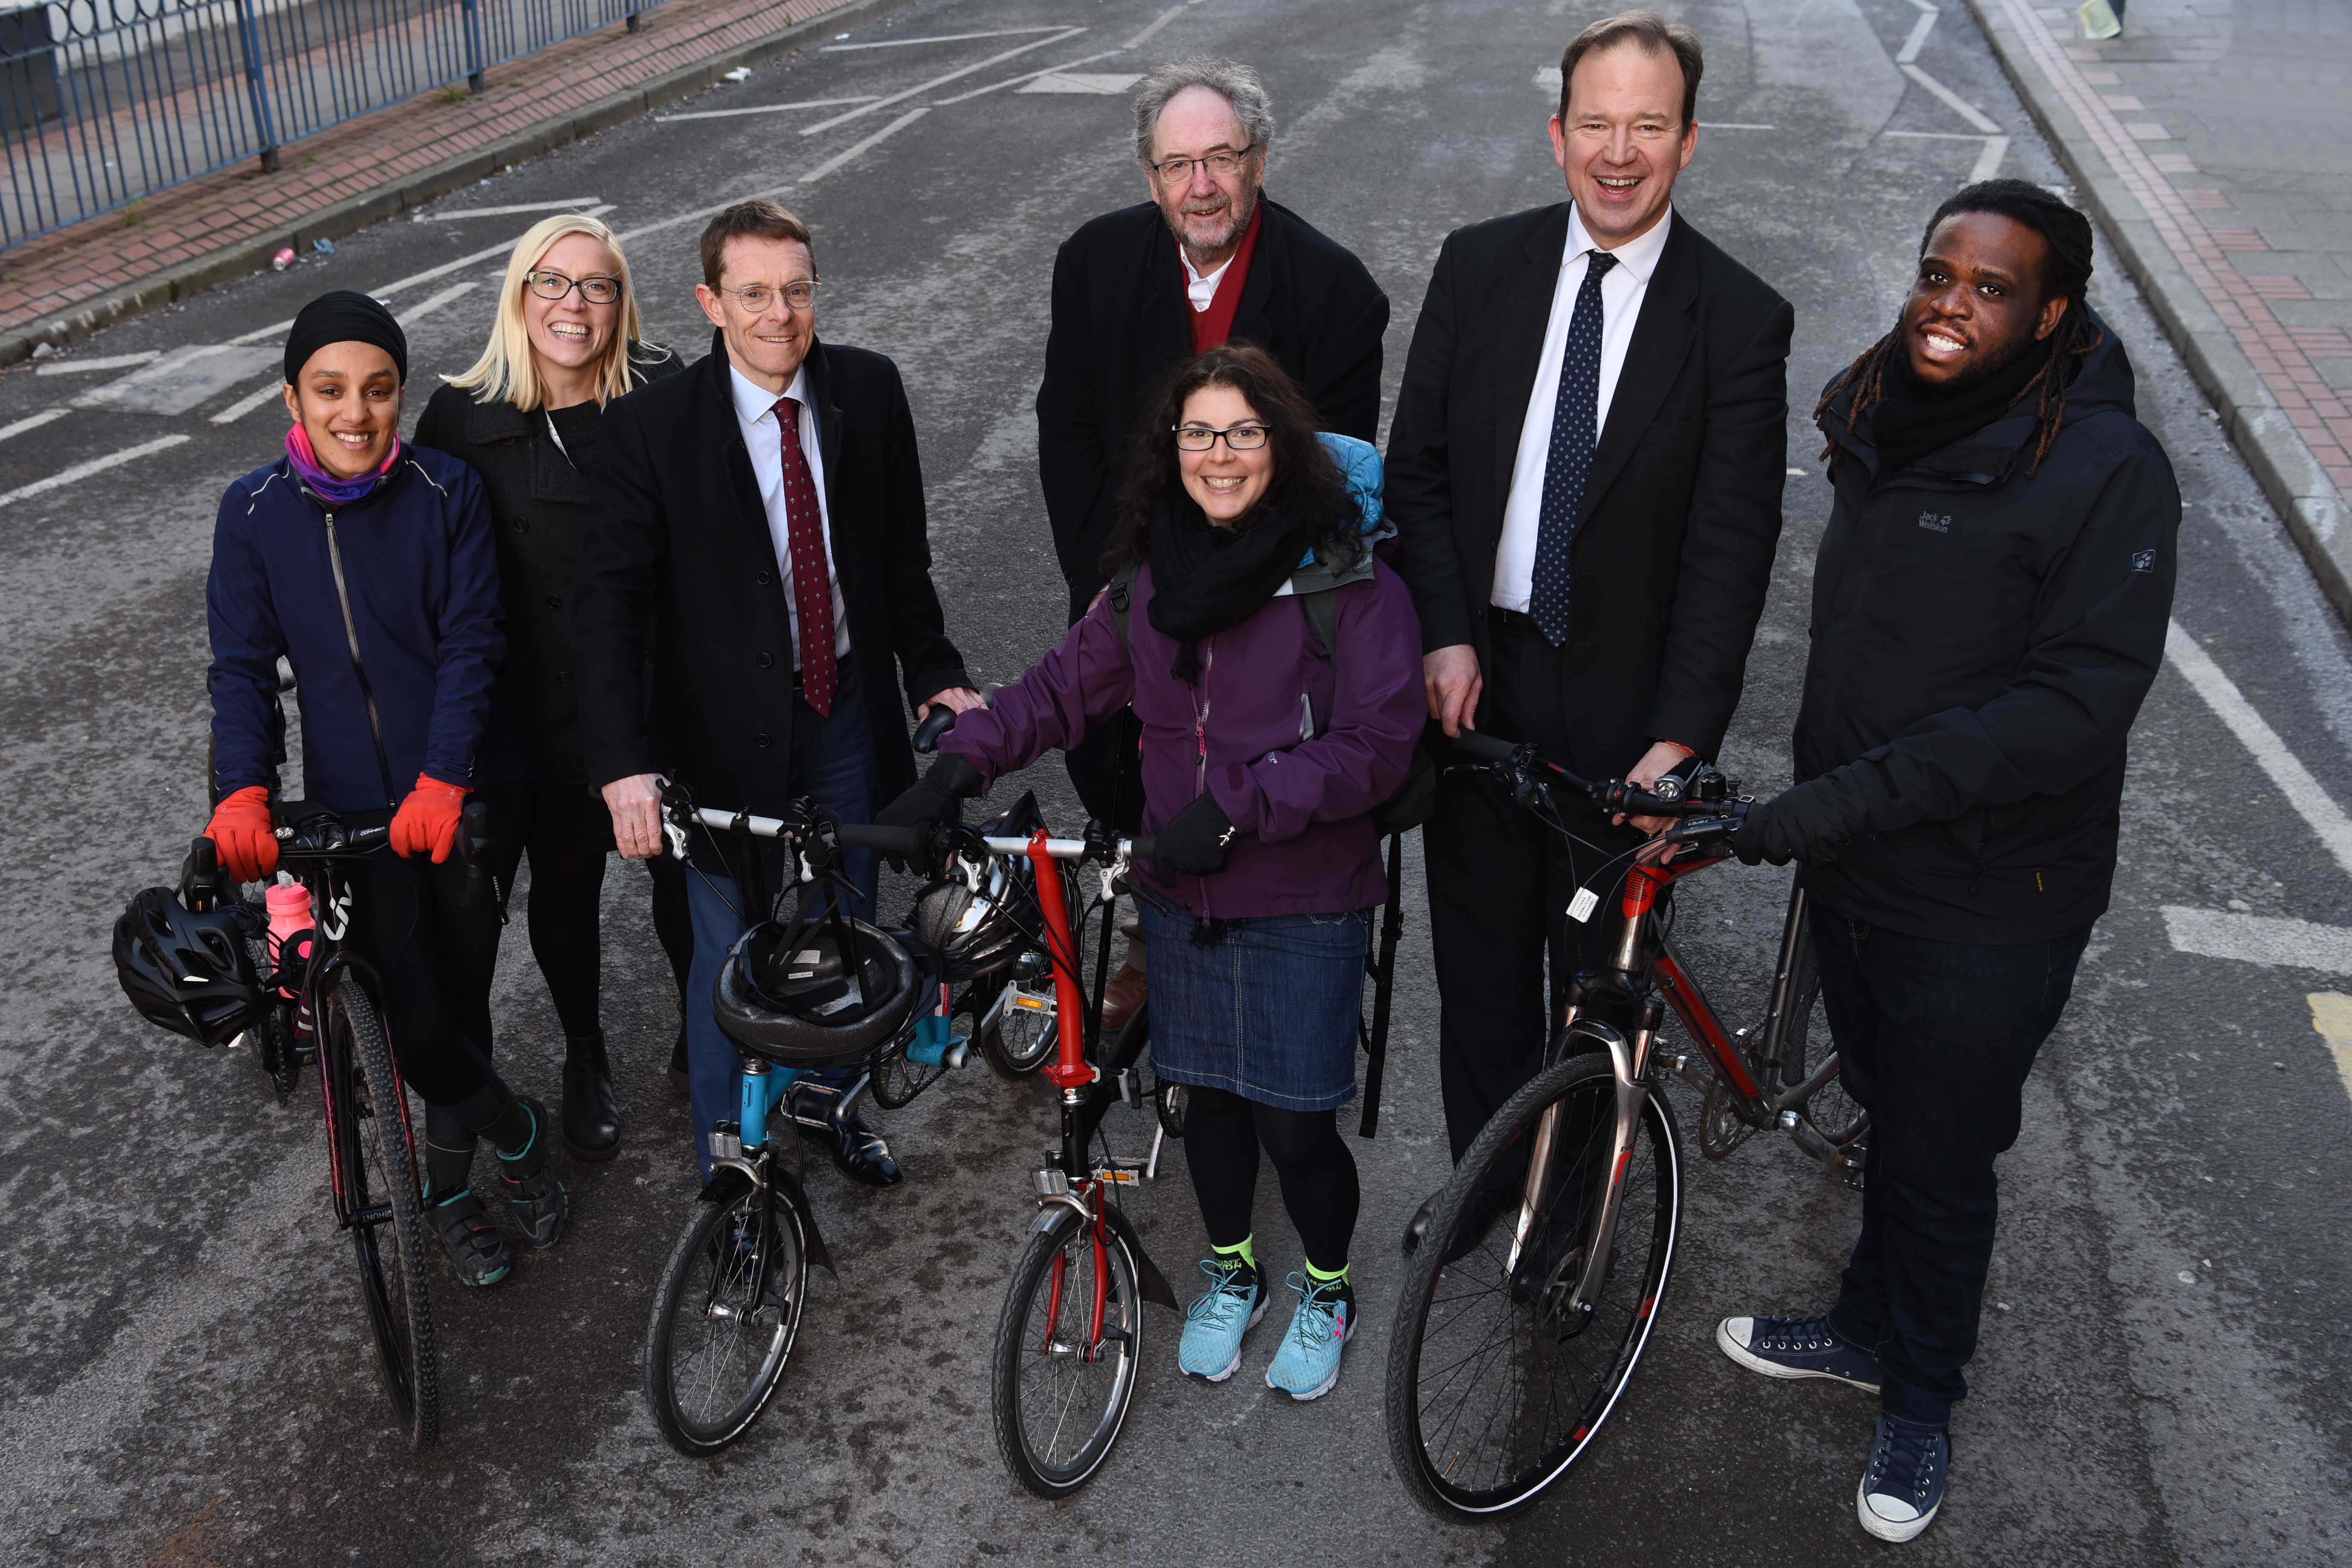 Imandeep Kaur, Claire Williams, Mayor of the West Midlands Andy Street, Cllr Roger Lawrence, Hannah Dayan, Jesse Norman MP and Daniel Blyden